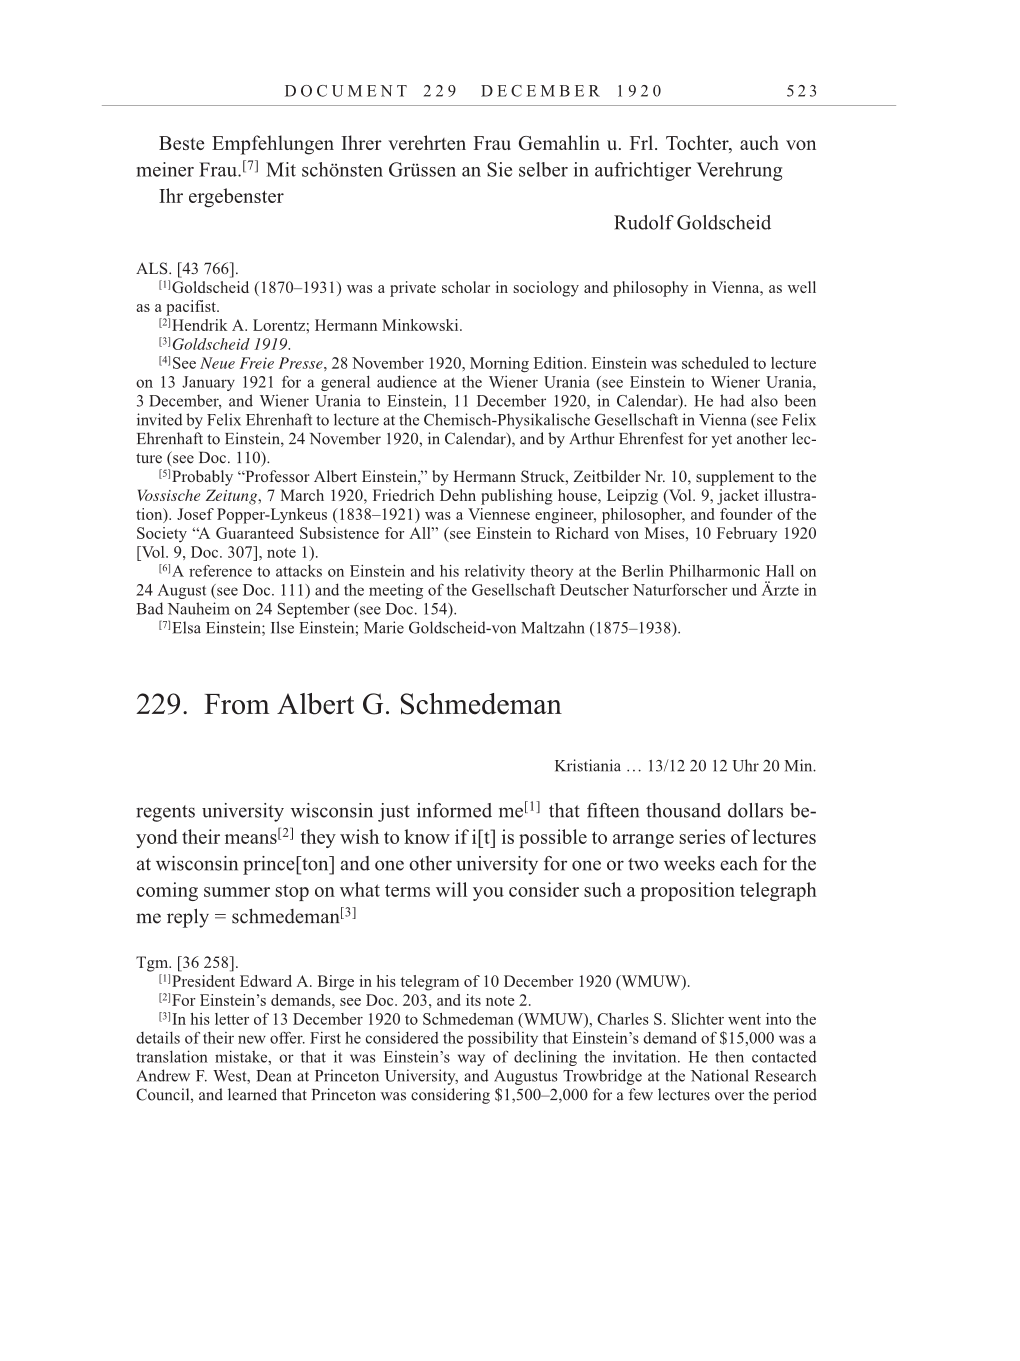 Volume 10: The Berlin Years: Correspondence May-December 1920 / Supplementary Correspondence 1909-1920 page 523